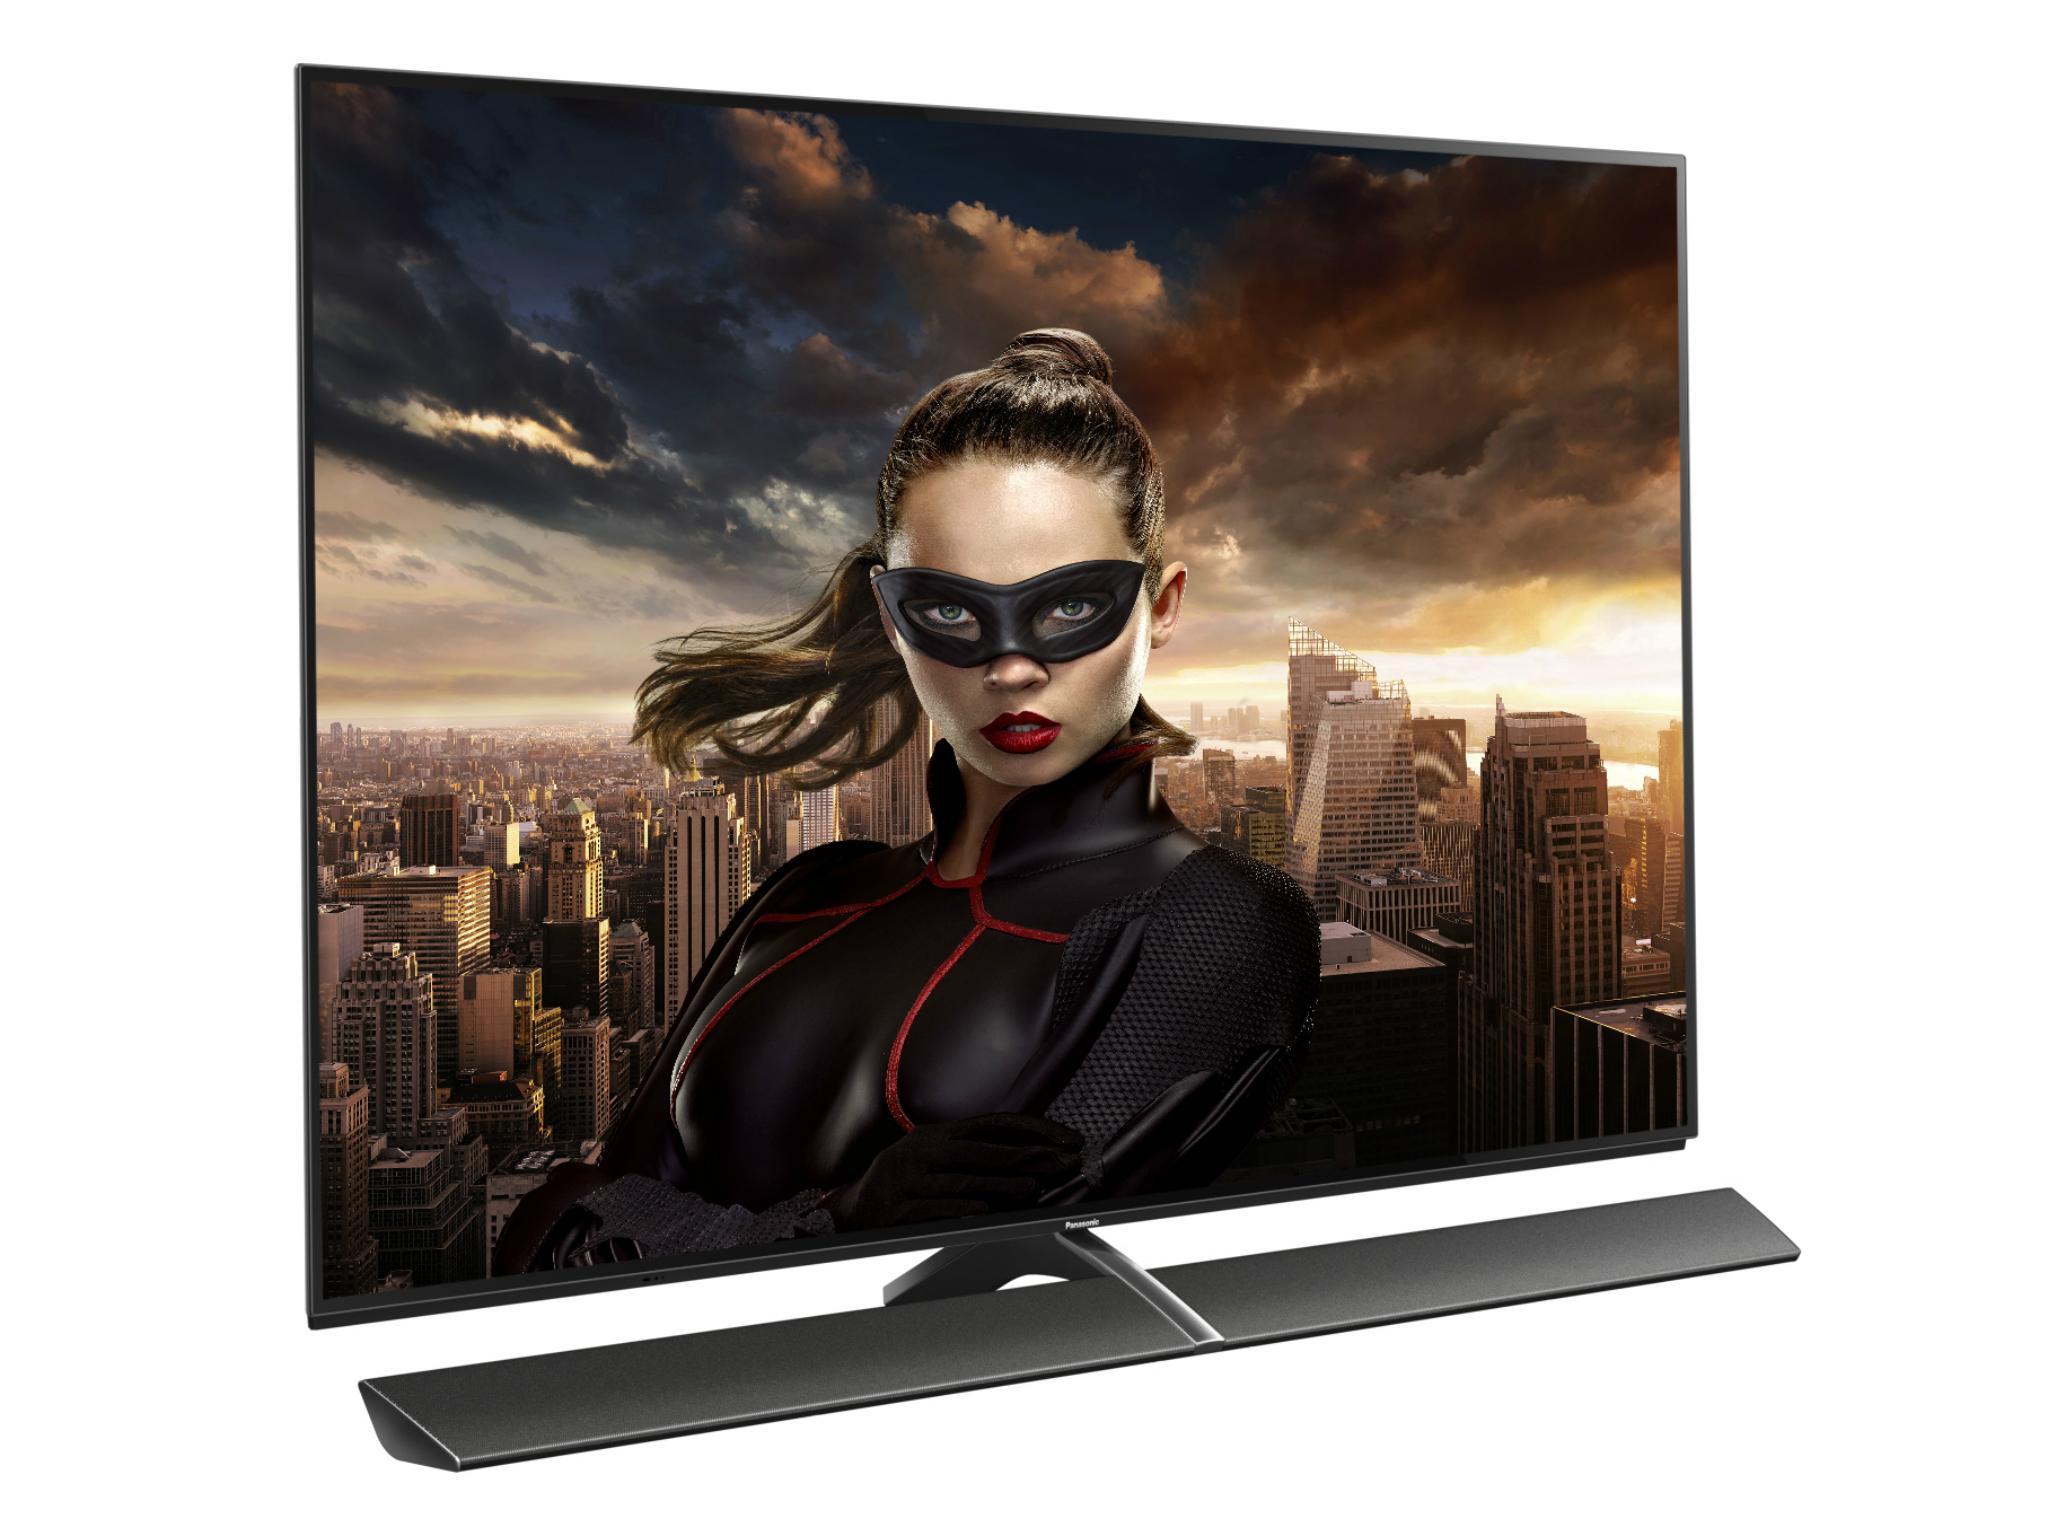 3D TV is here